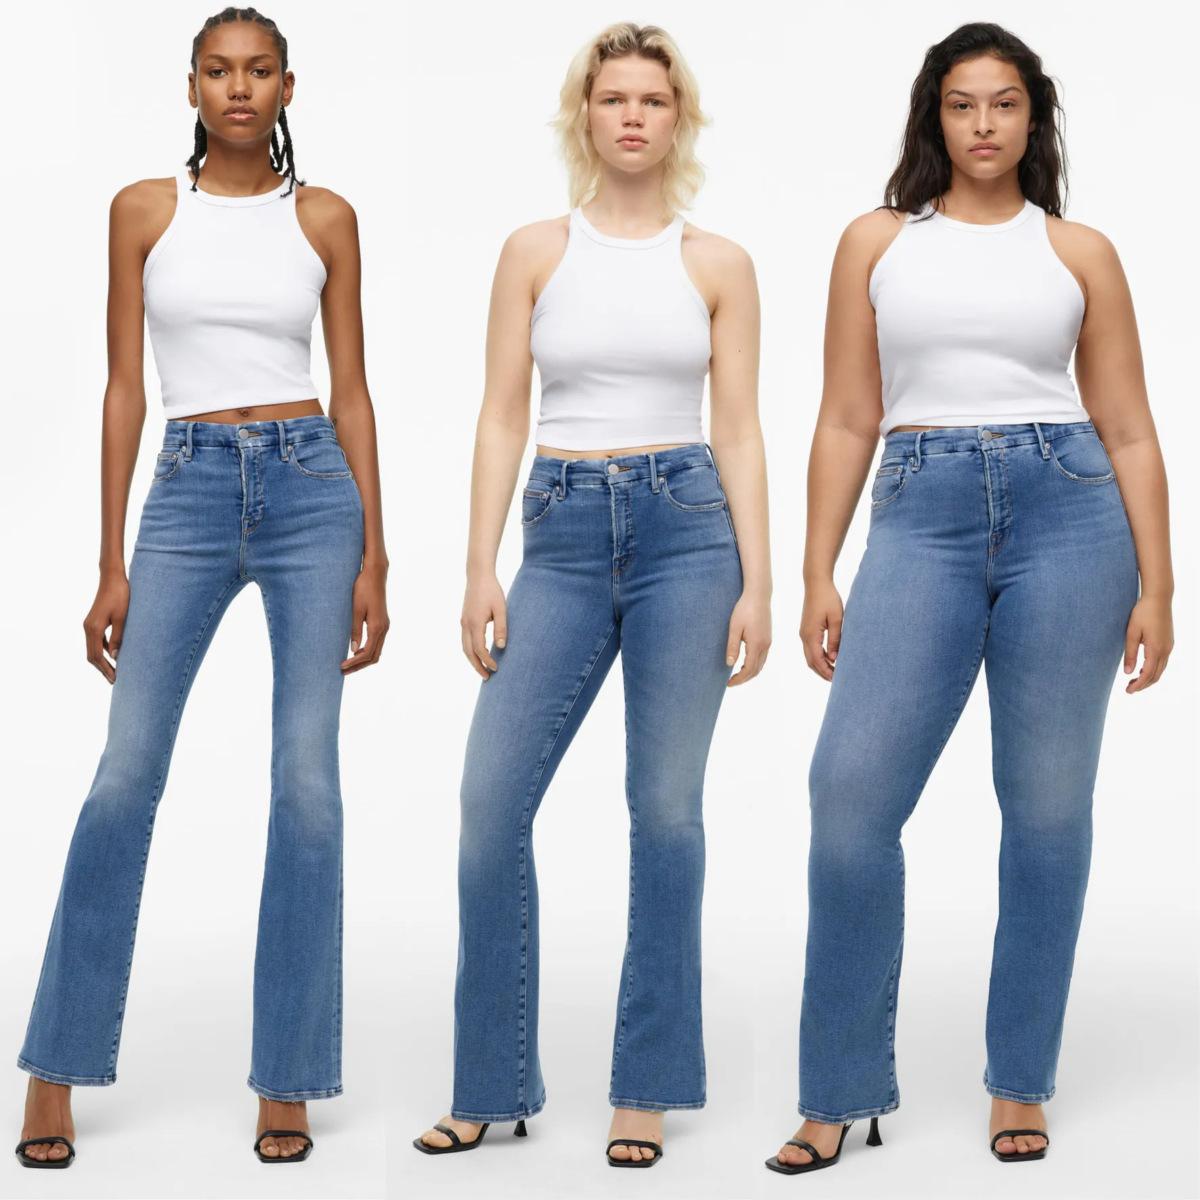 How Do Good American Jeans Fit? A Fit and Fit Guide